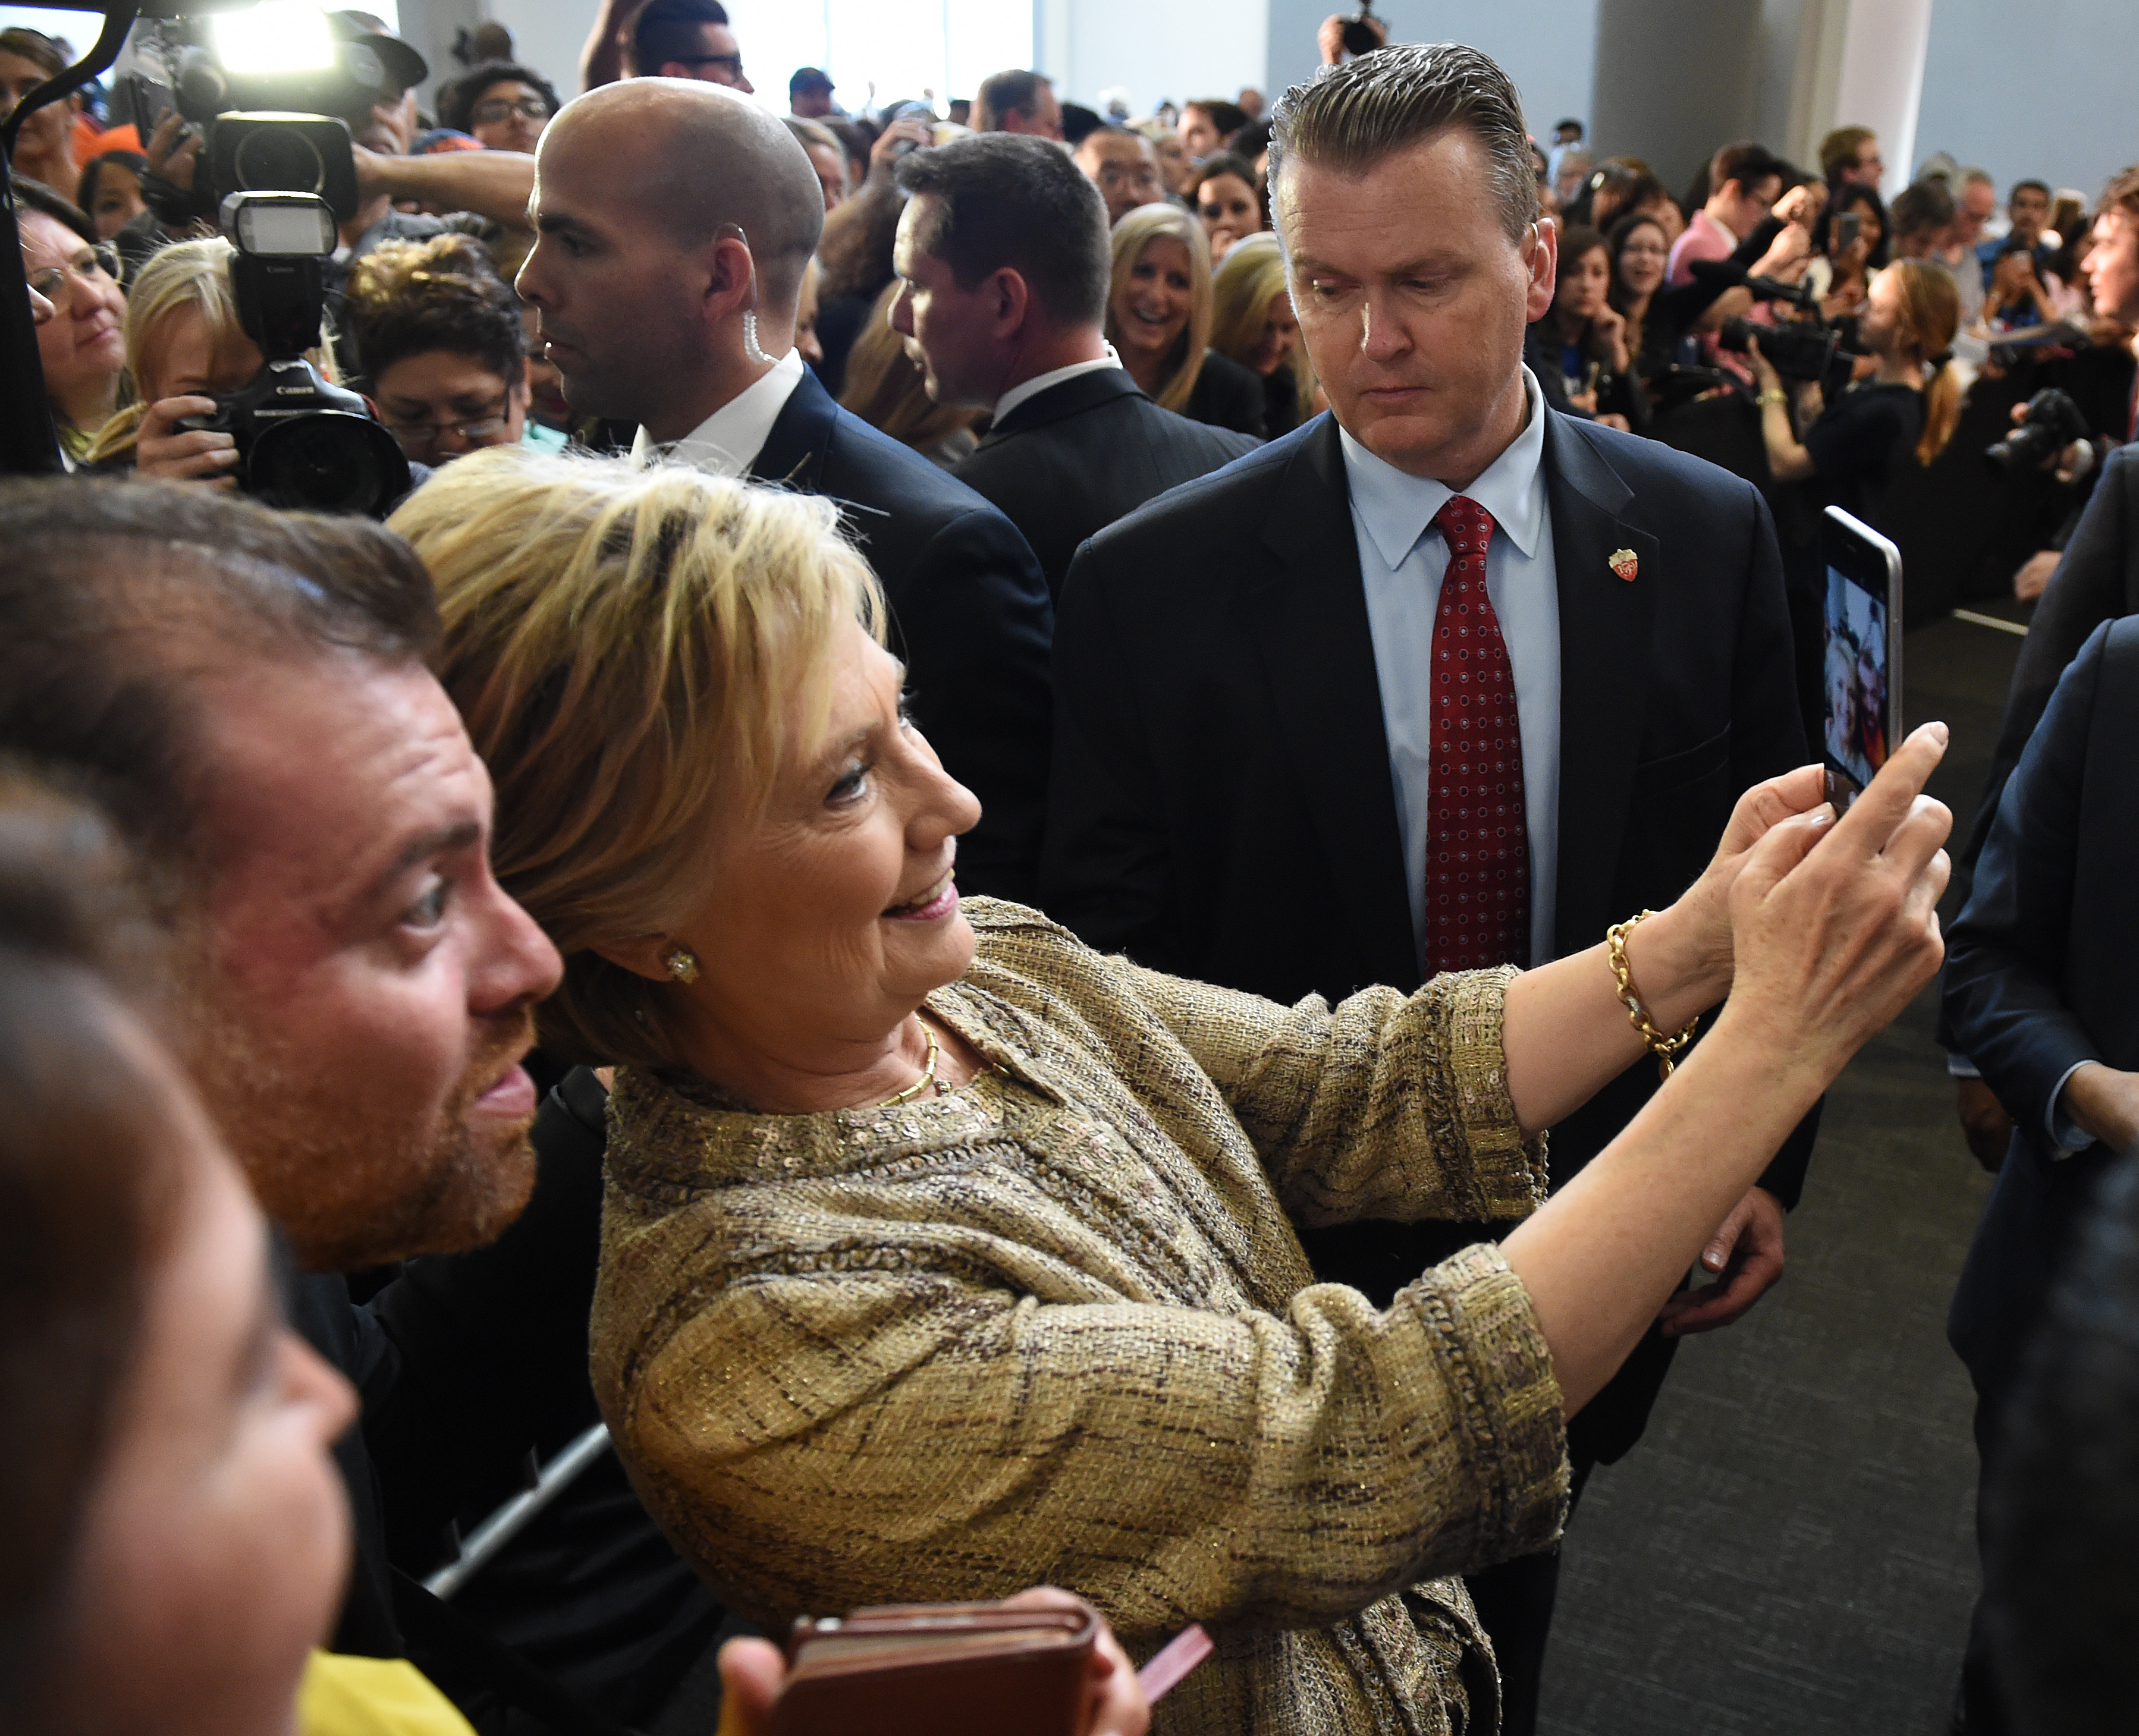 Hillary Clinton takes a selfie with a fan during a campaign rally at the Southwest College